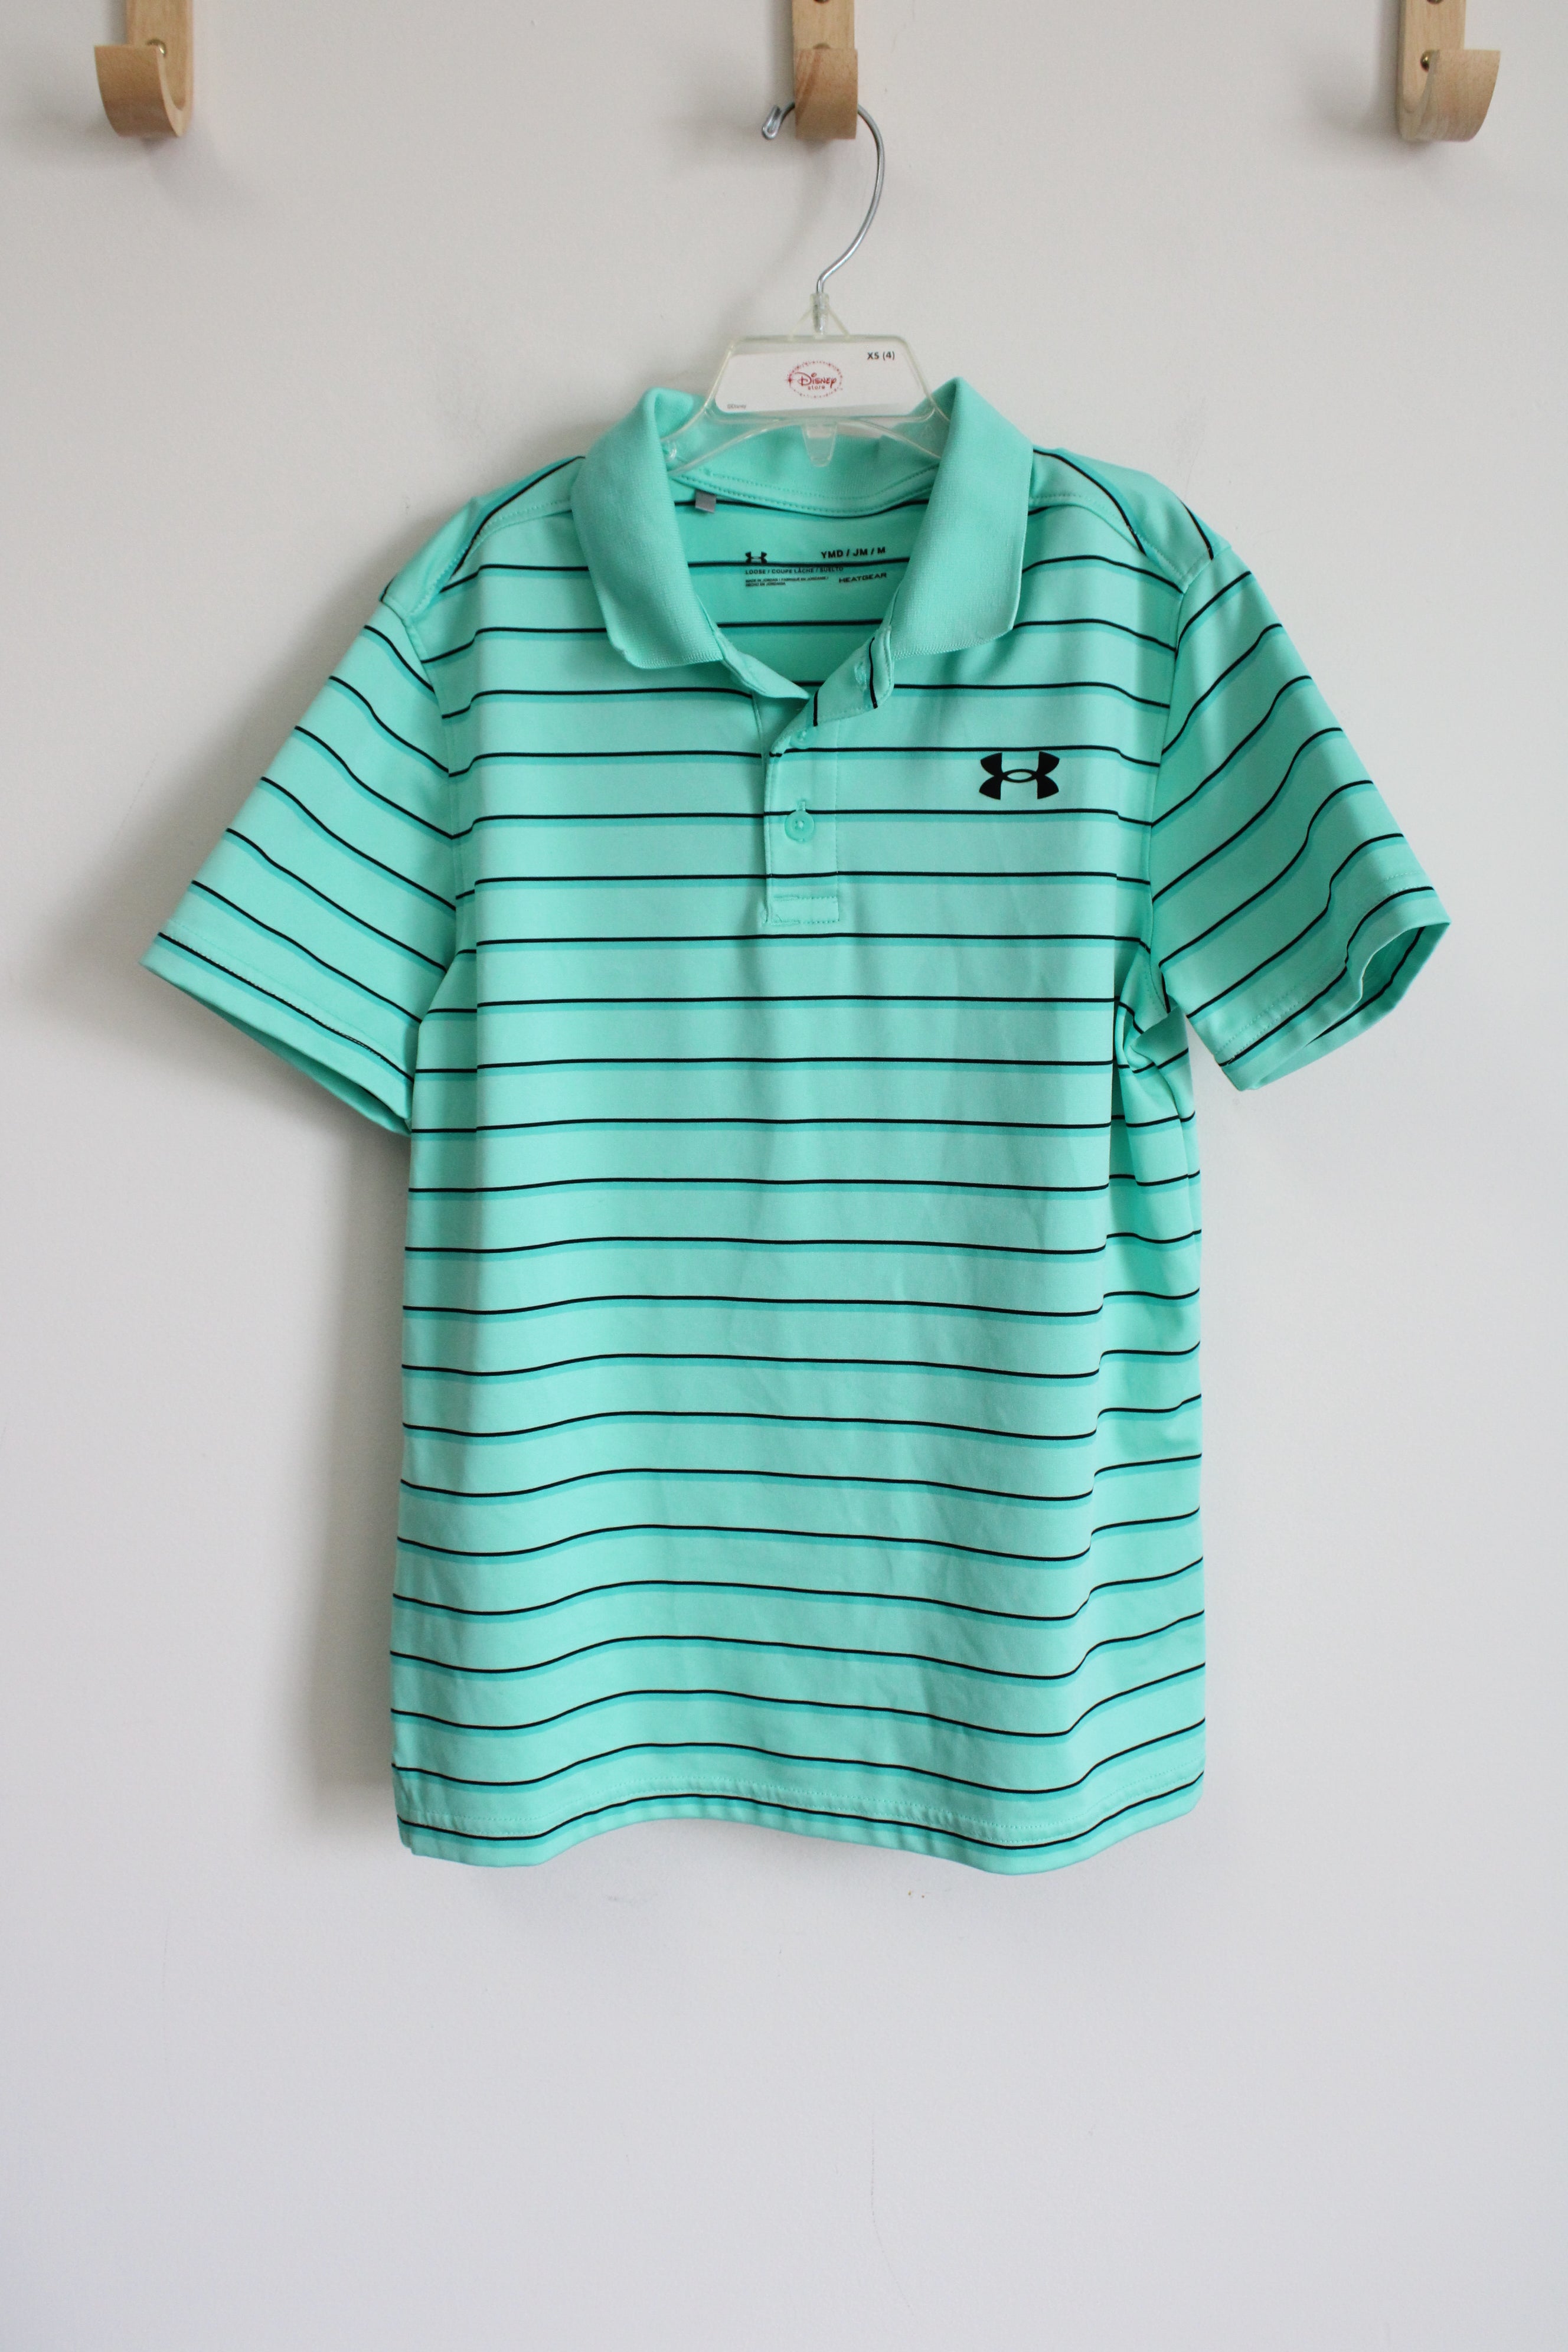 Under Armour Green Striped Polo | Youth M (7/8)